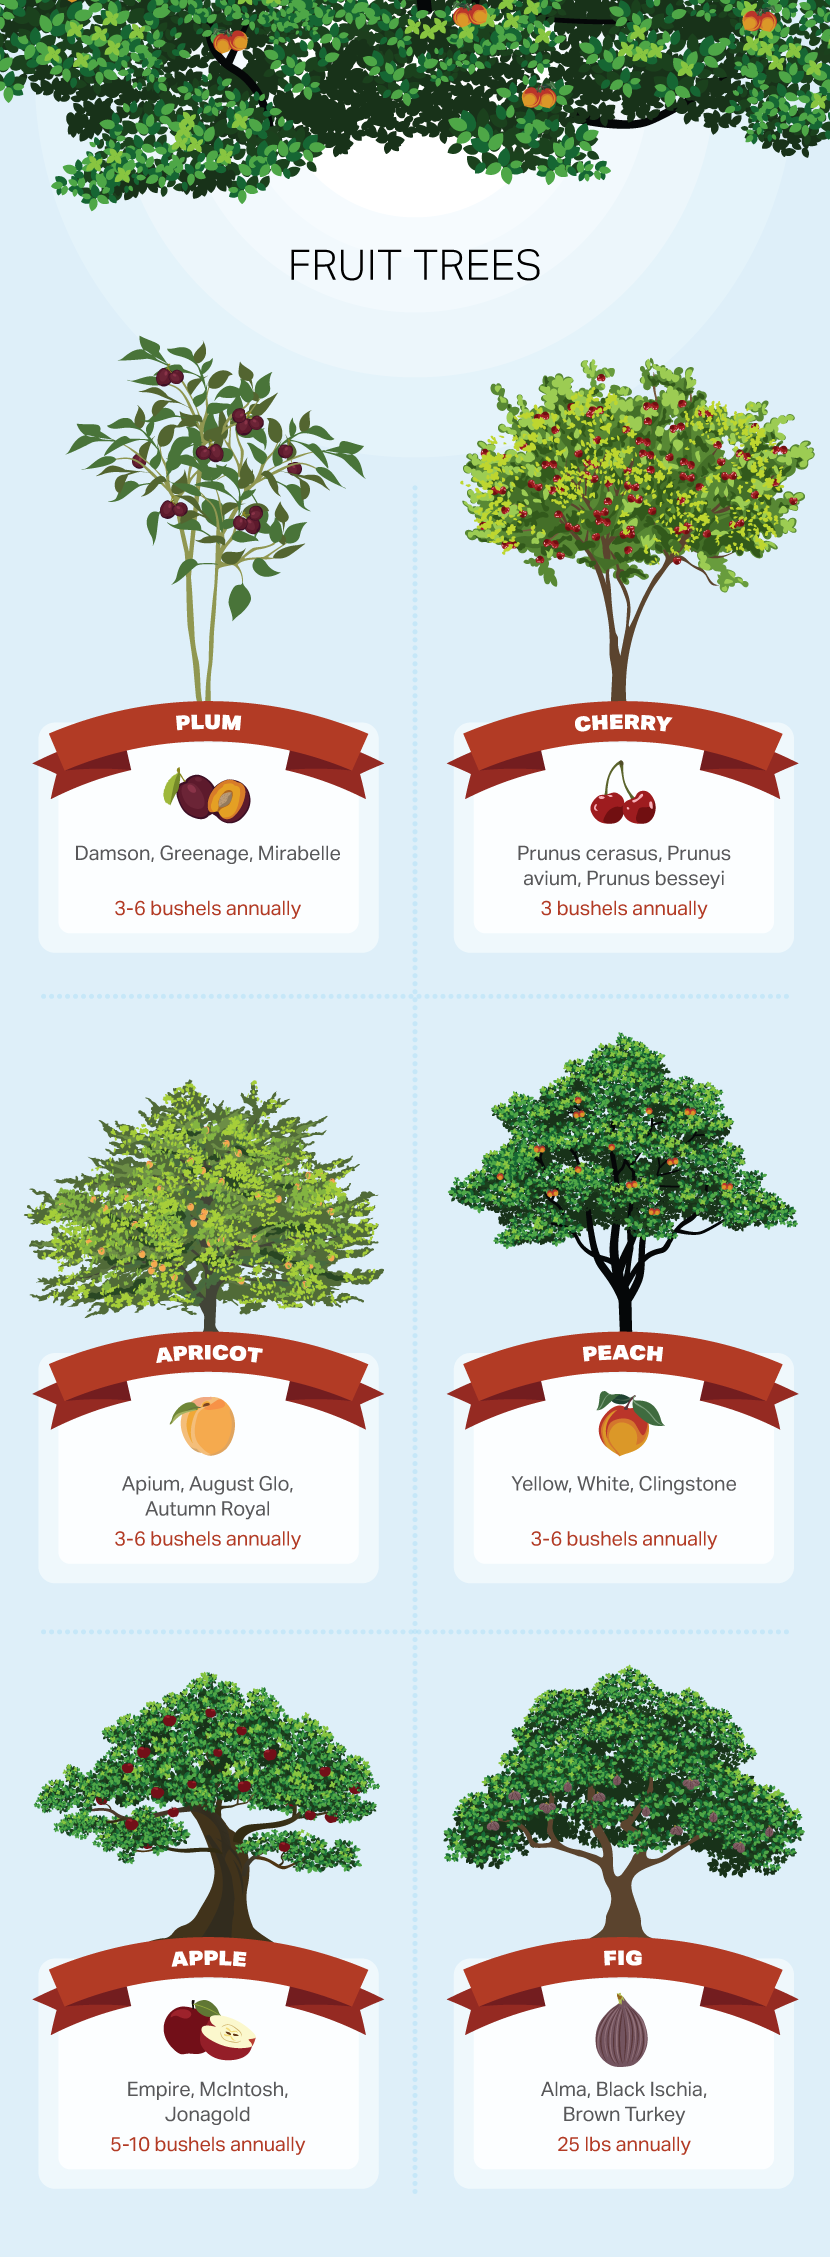 Fruit Trees - How to Choose a Tree For Your Yard or Garden